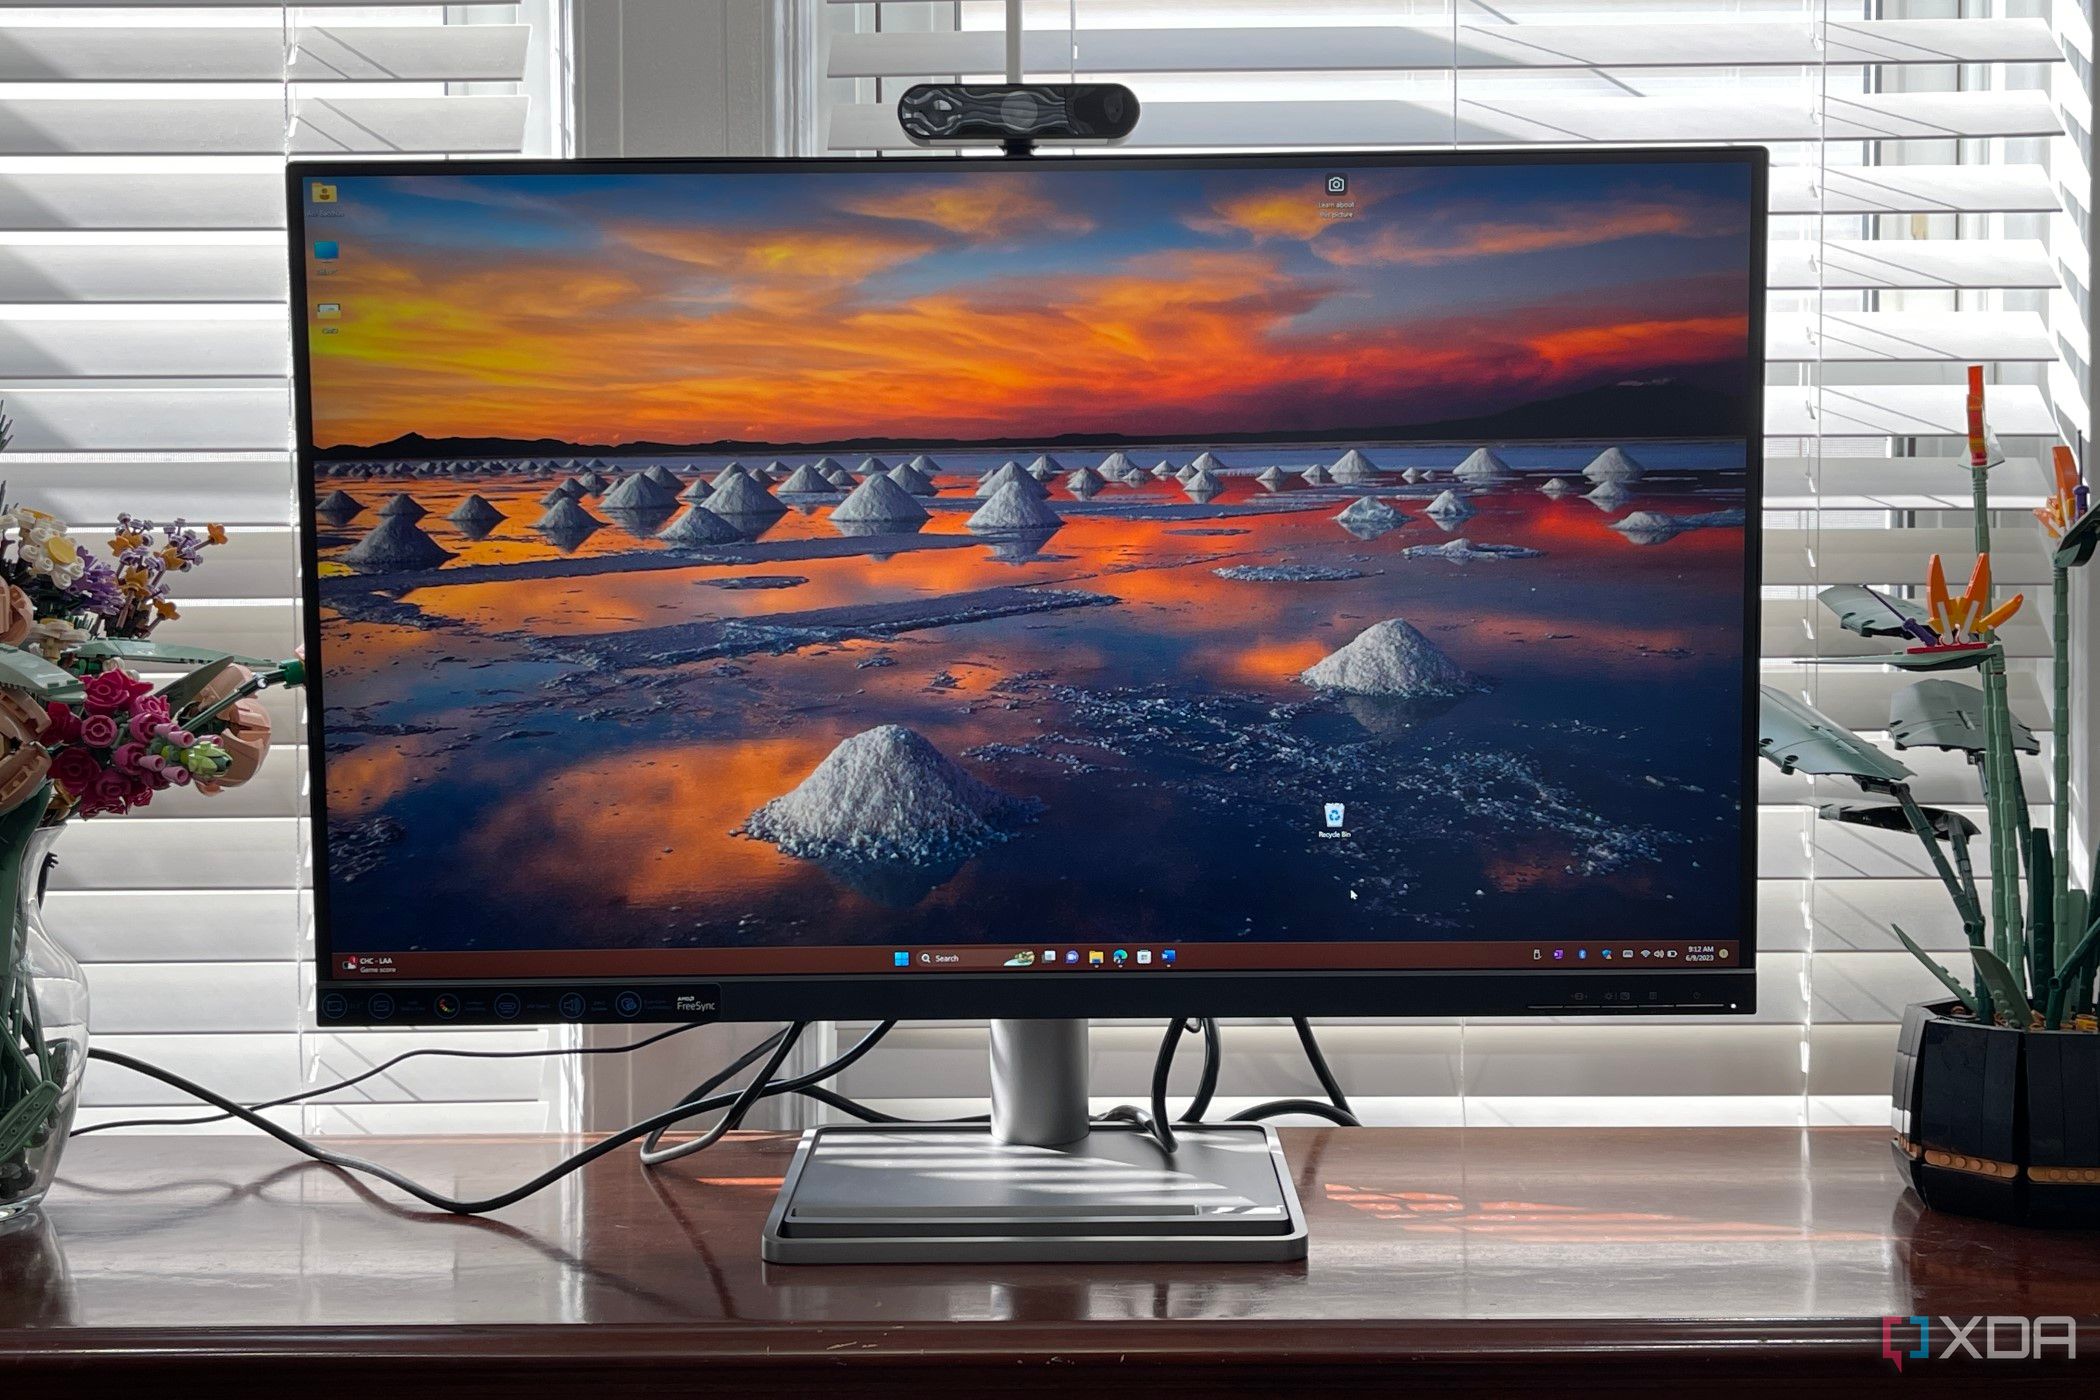 lenovo-l32p-30-monitor-review:-a-great-4k-budget-gaming-monitor-with-some-small-flaws